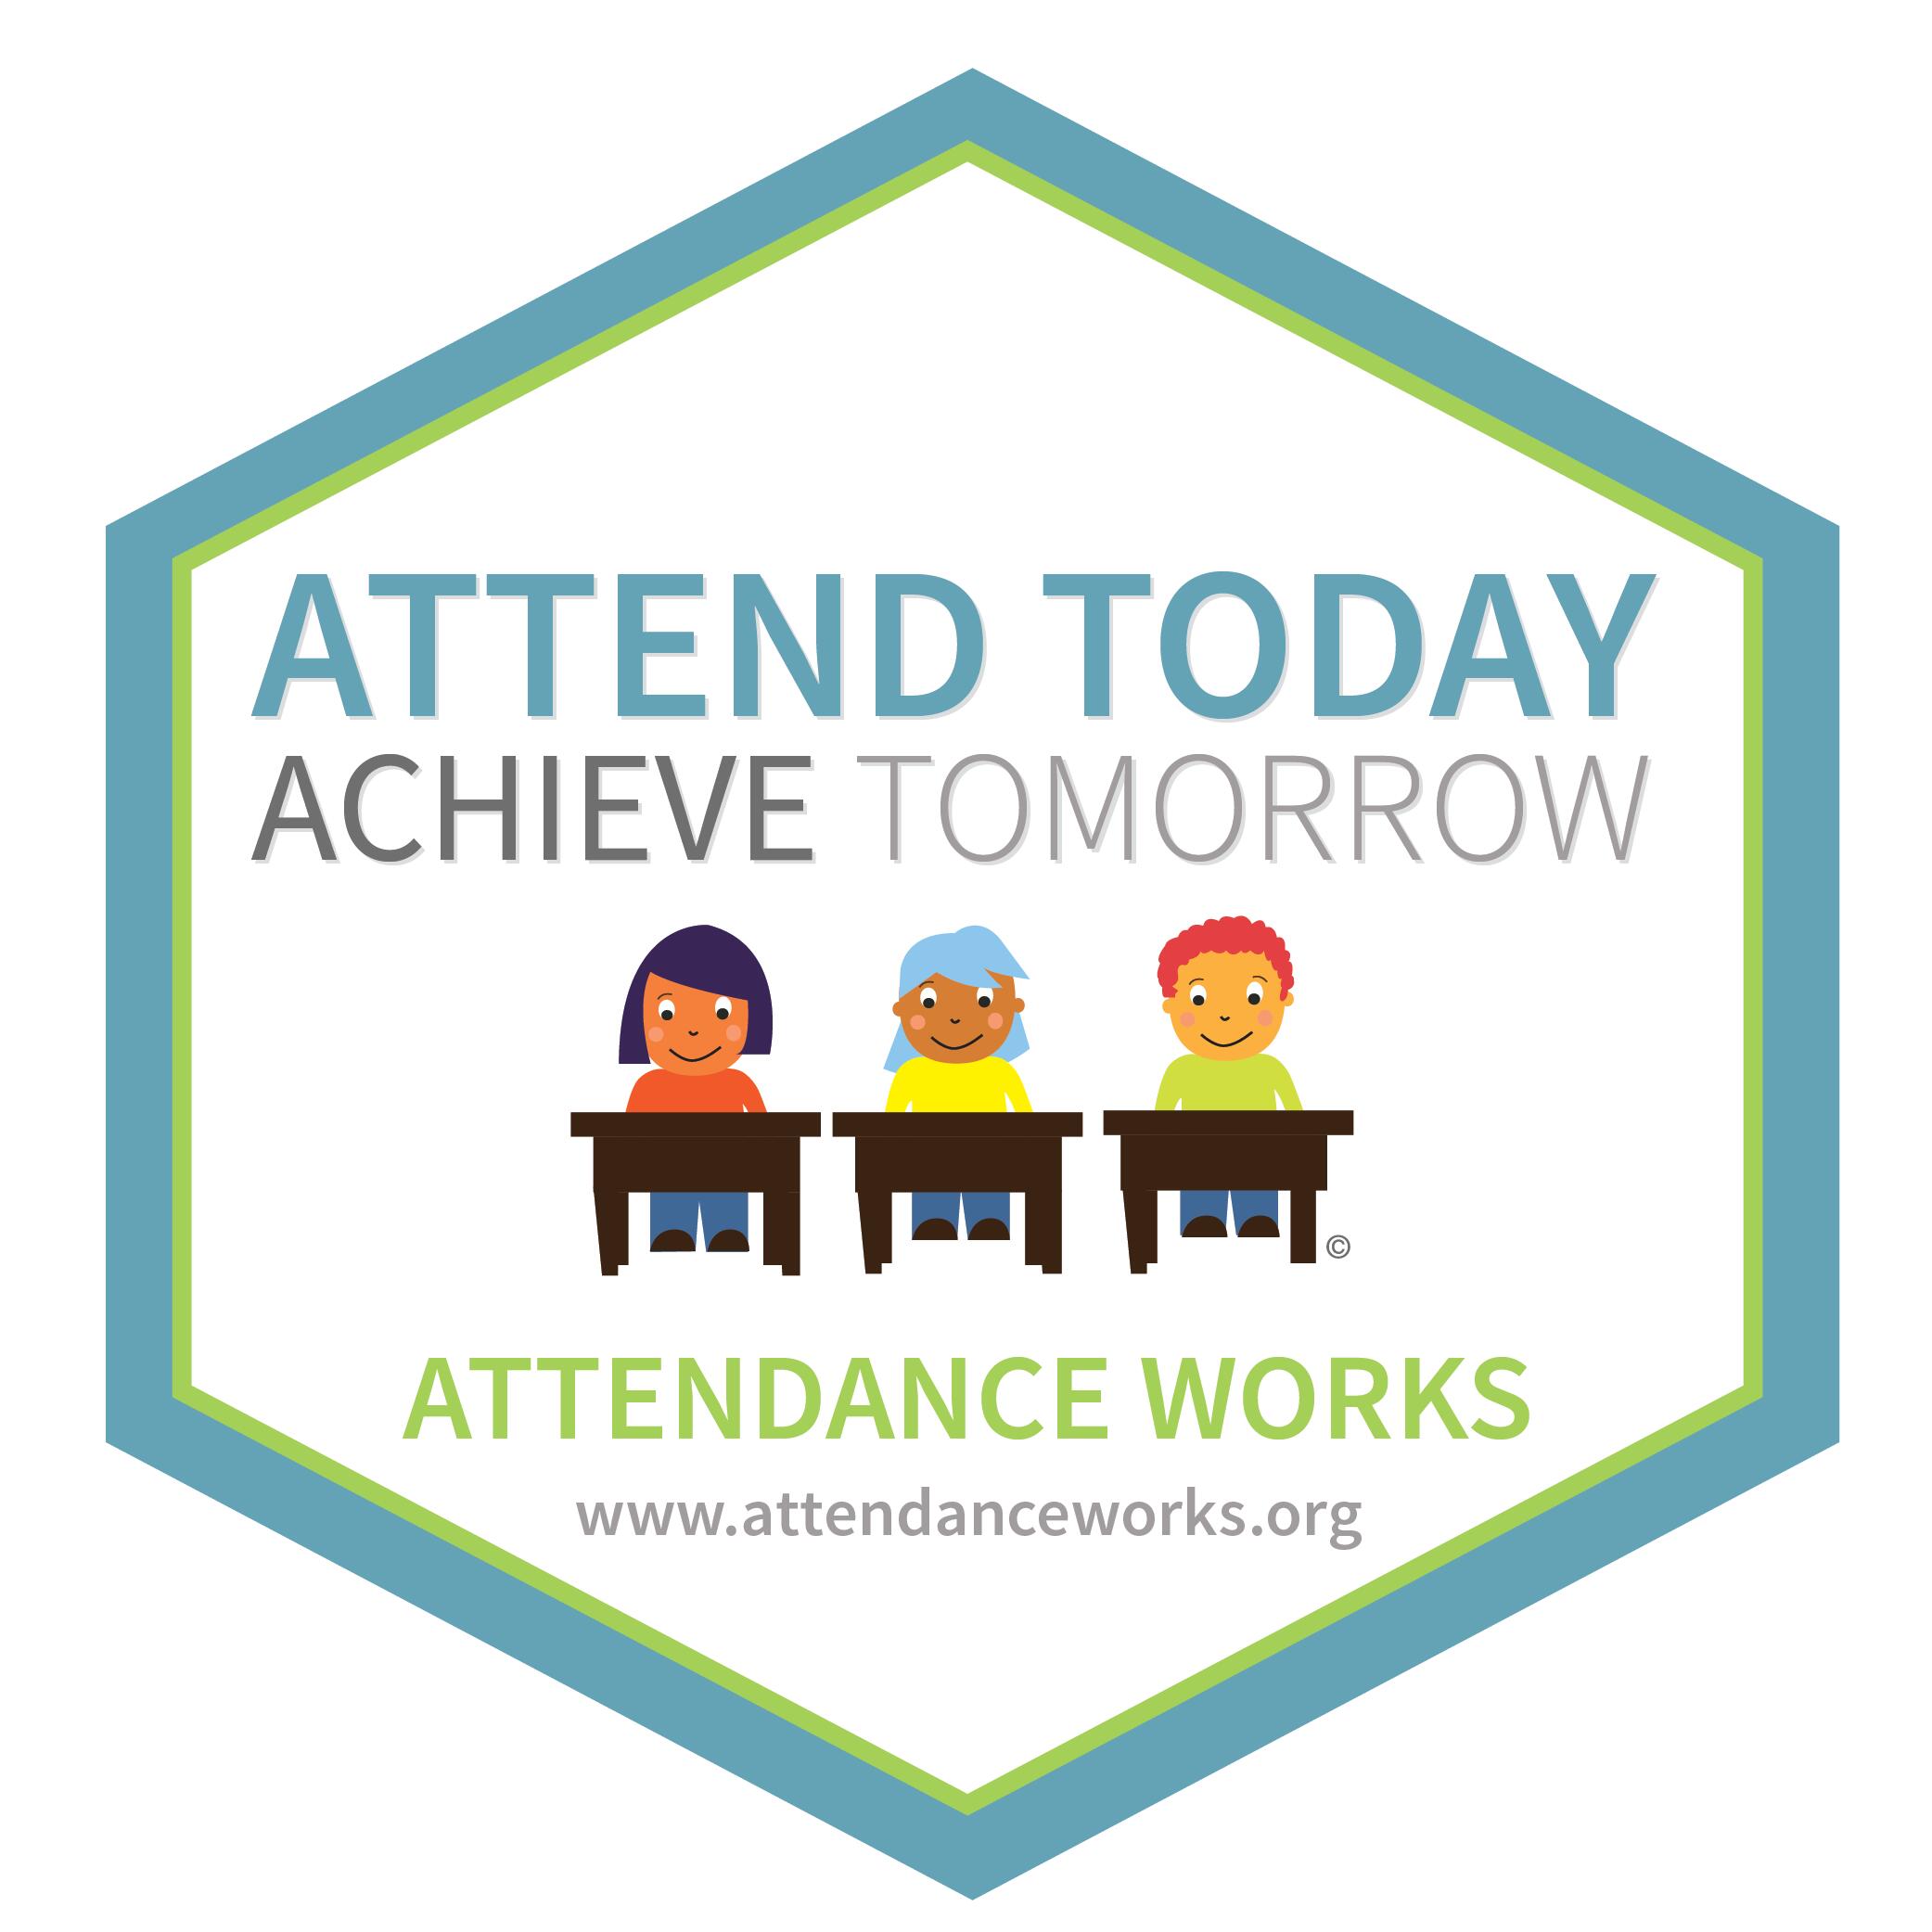 attend today achieve tomorrow attendance works badge